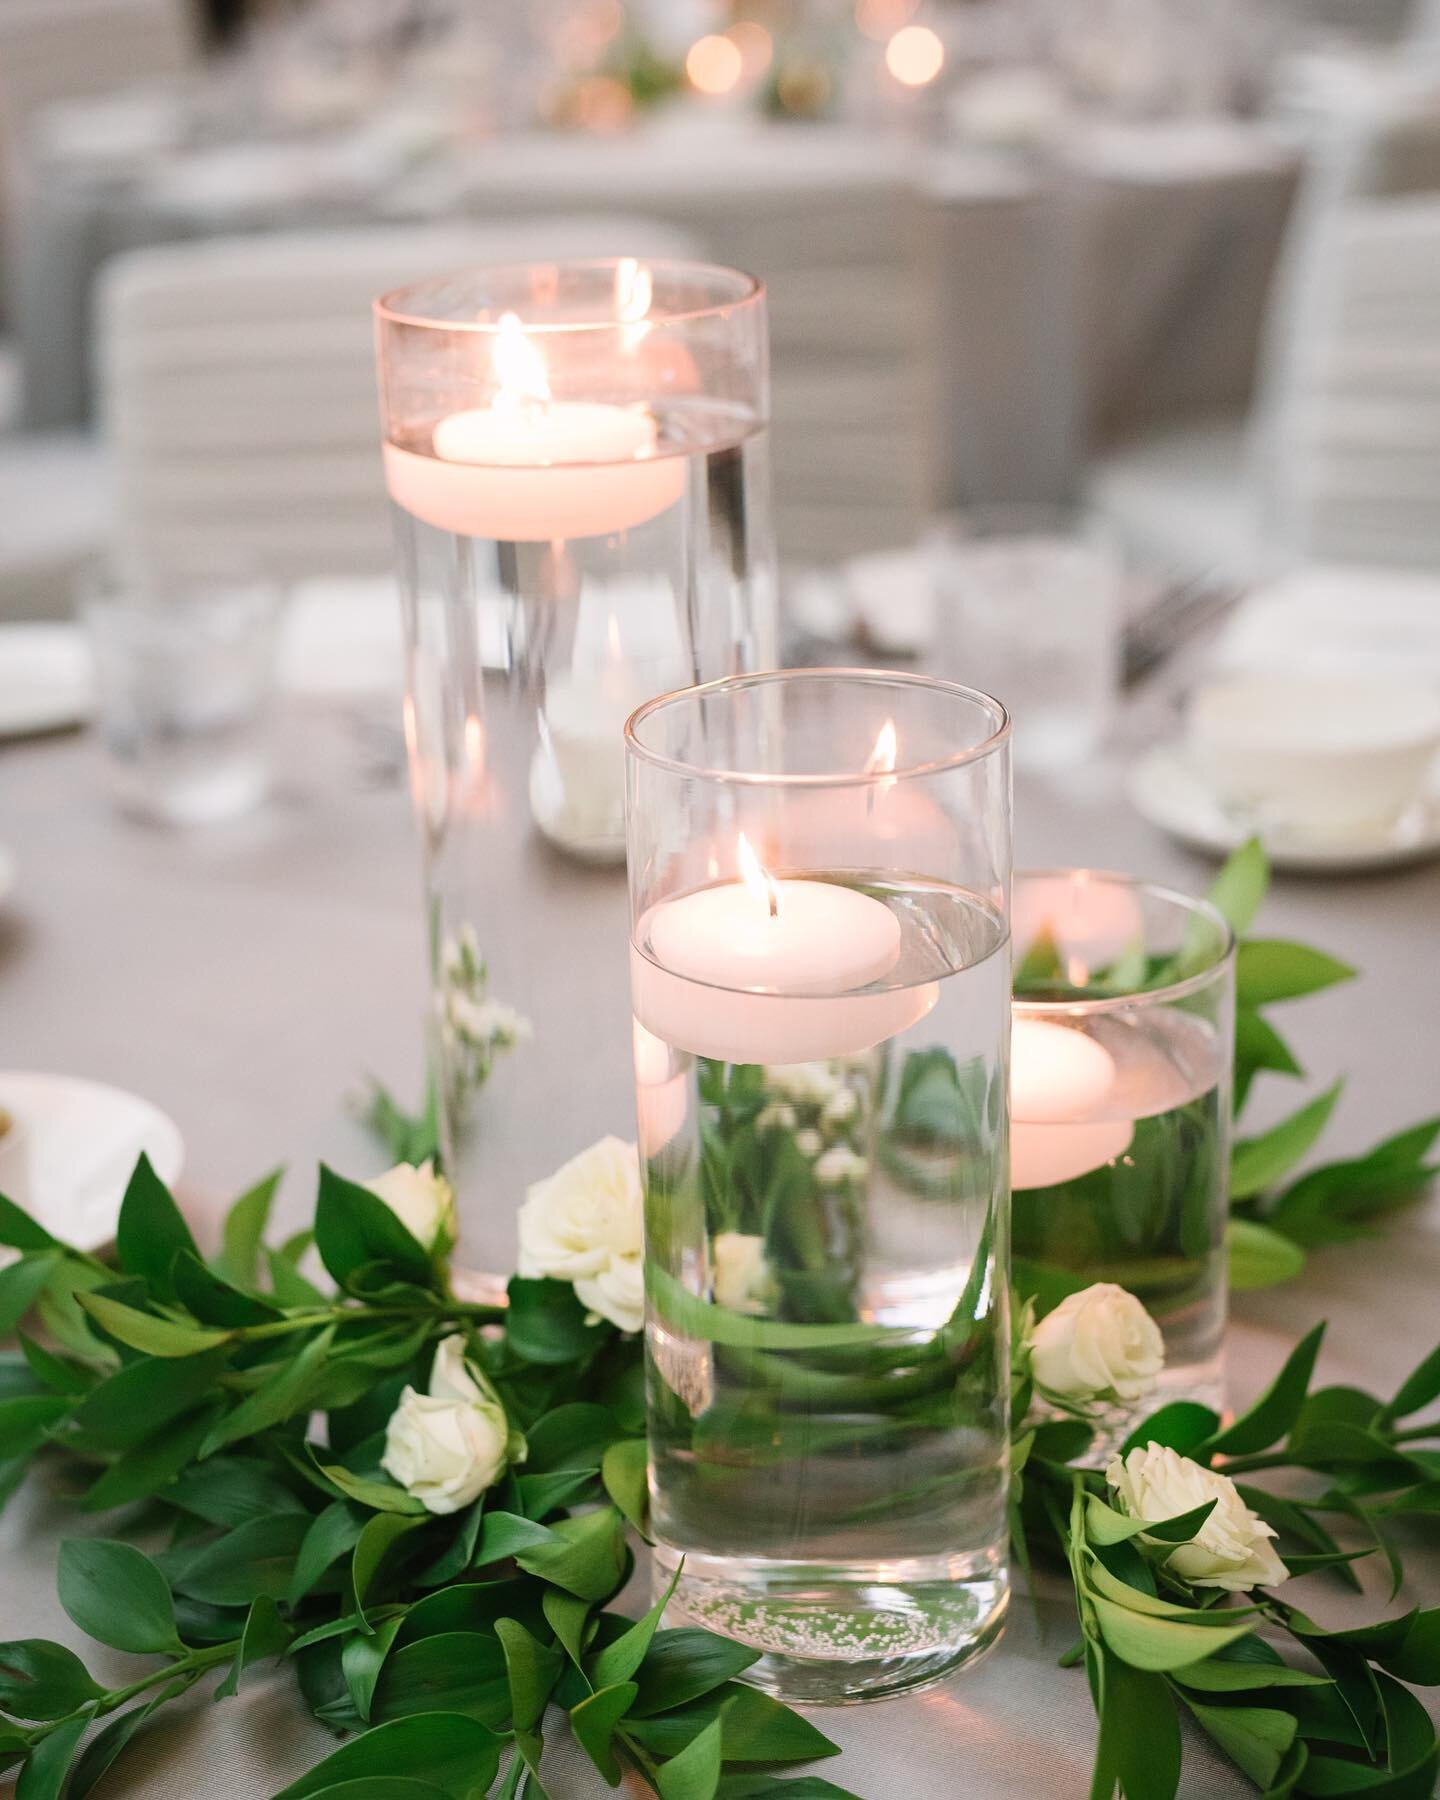 Something that will never go out of style at weddings is... candlelight 🕯✨

Whether you have pillar candles or floating ones like in this first photo or votive ones like in the second photo, trust us when we say candles will be so beautiful and time